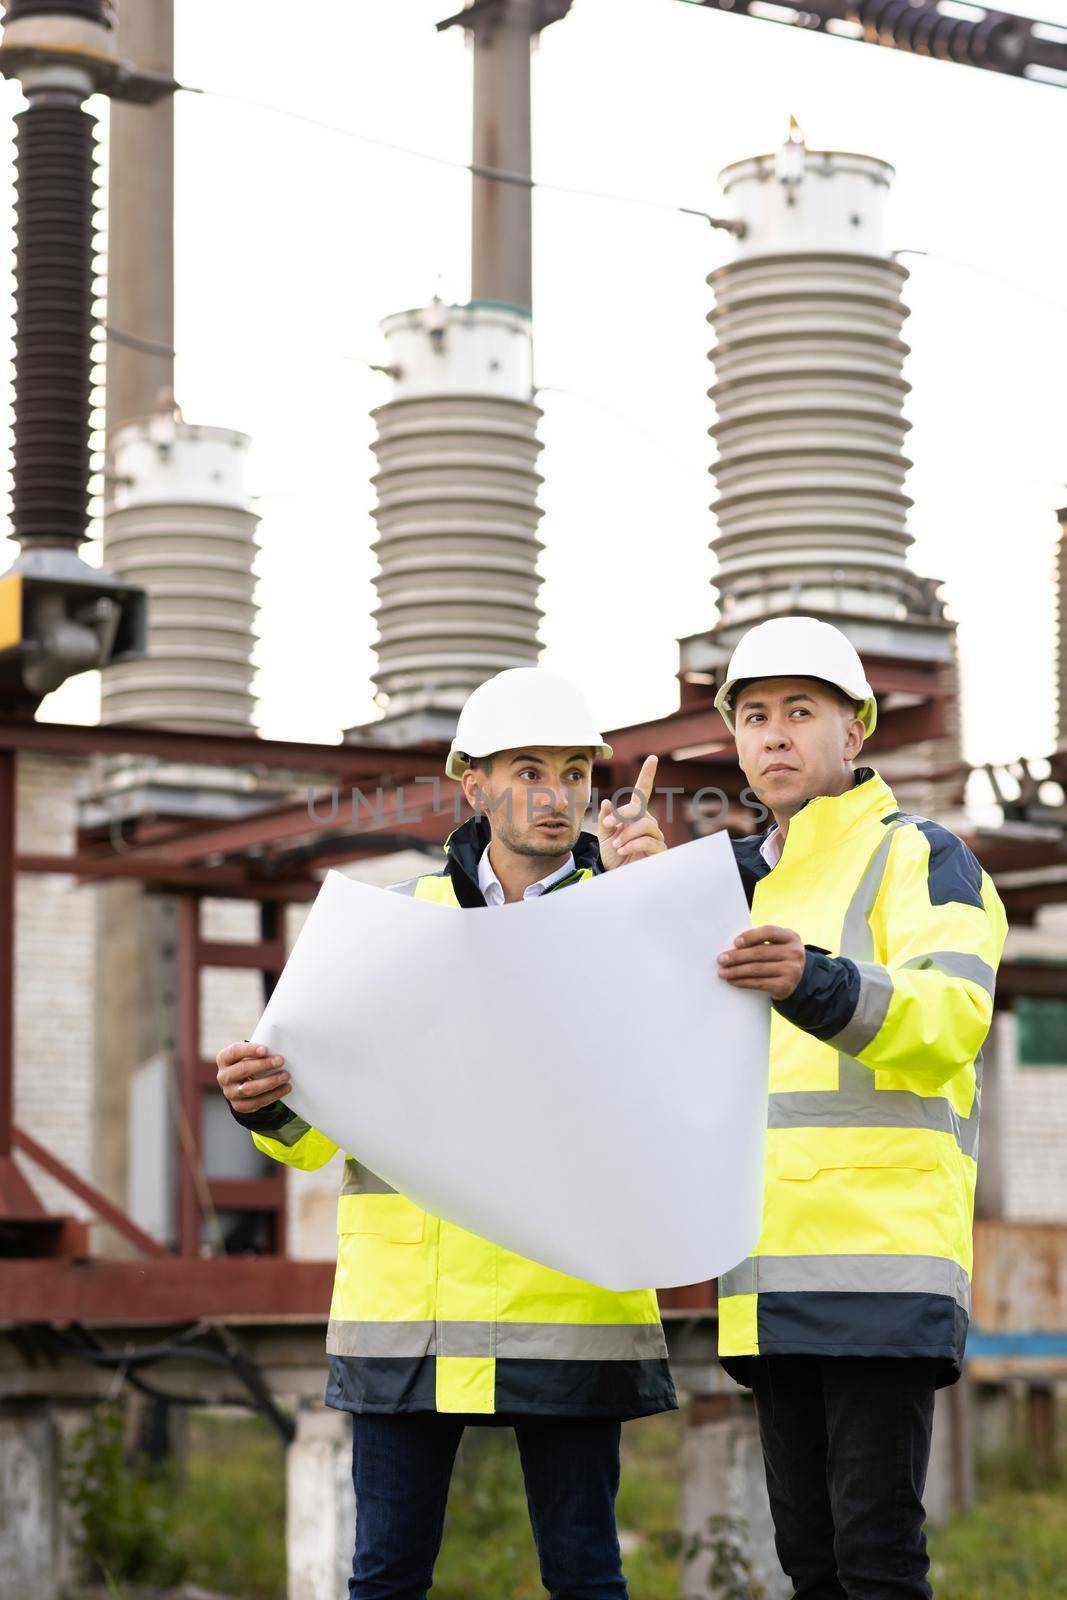 Engineers near high-voltage powerline working with a construction plan. Two engineers in special clothing discuss a drawing on paper against the background of a high-voltage power line by uflypro